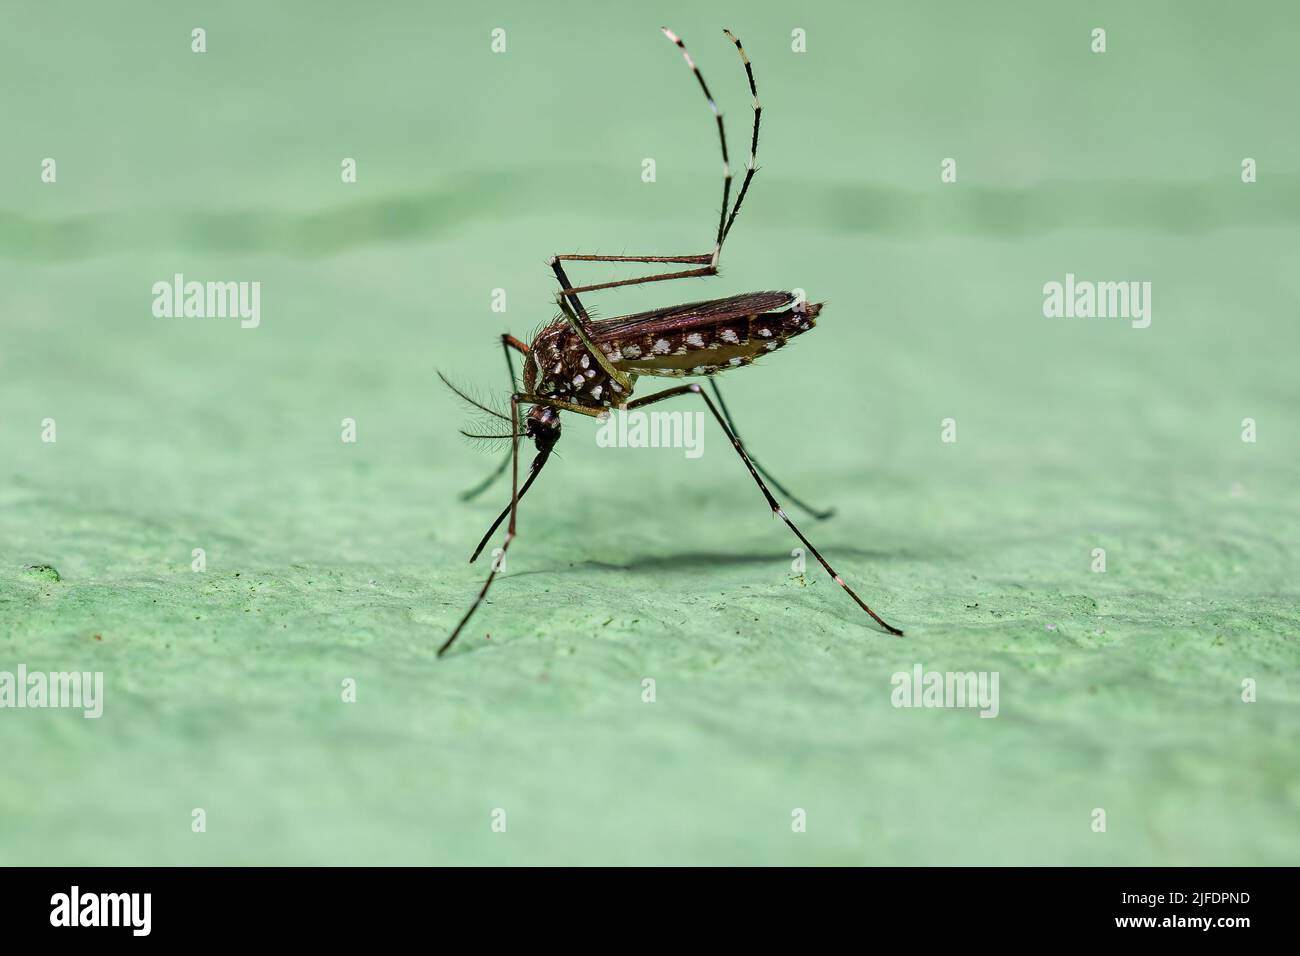 Adult Female Yellow Fever Mosquito of the species Aedes aegypti Stock Photo